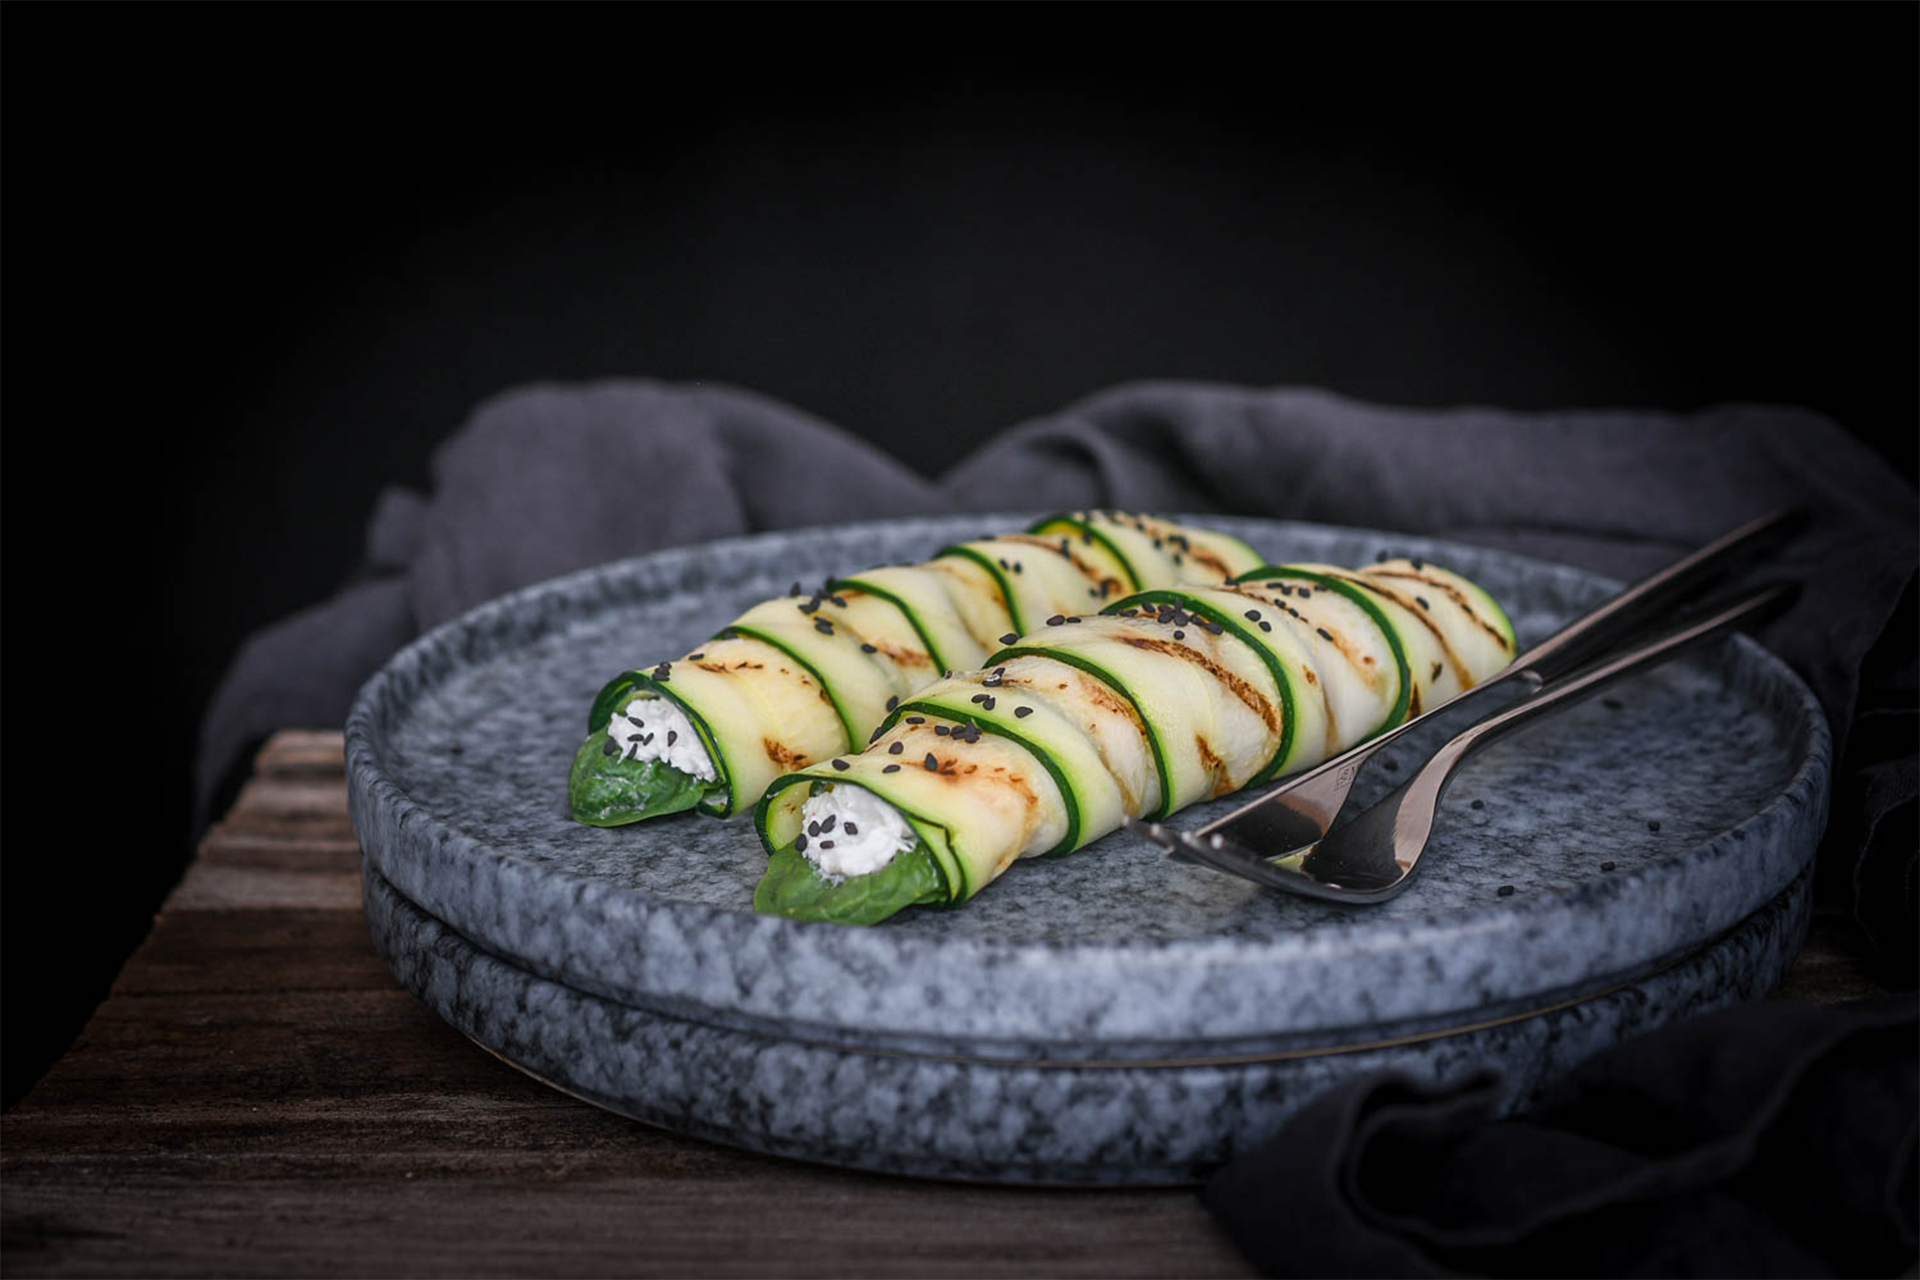 Courgette rolls stuffed with spinach and goat cheese